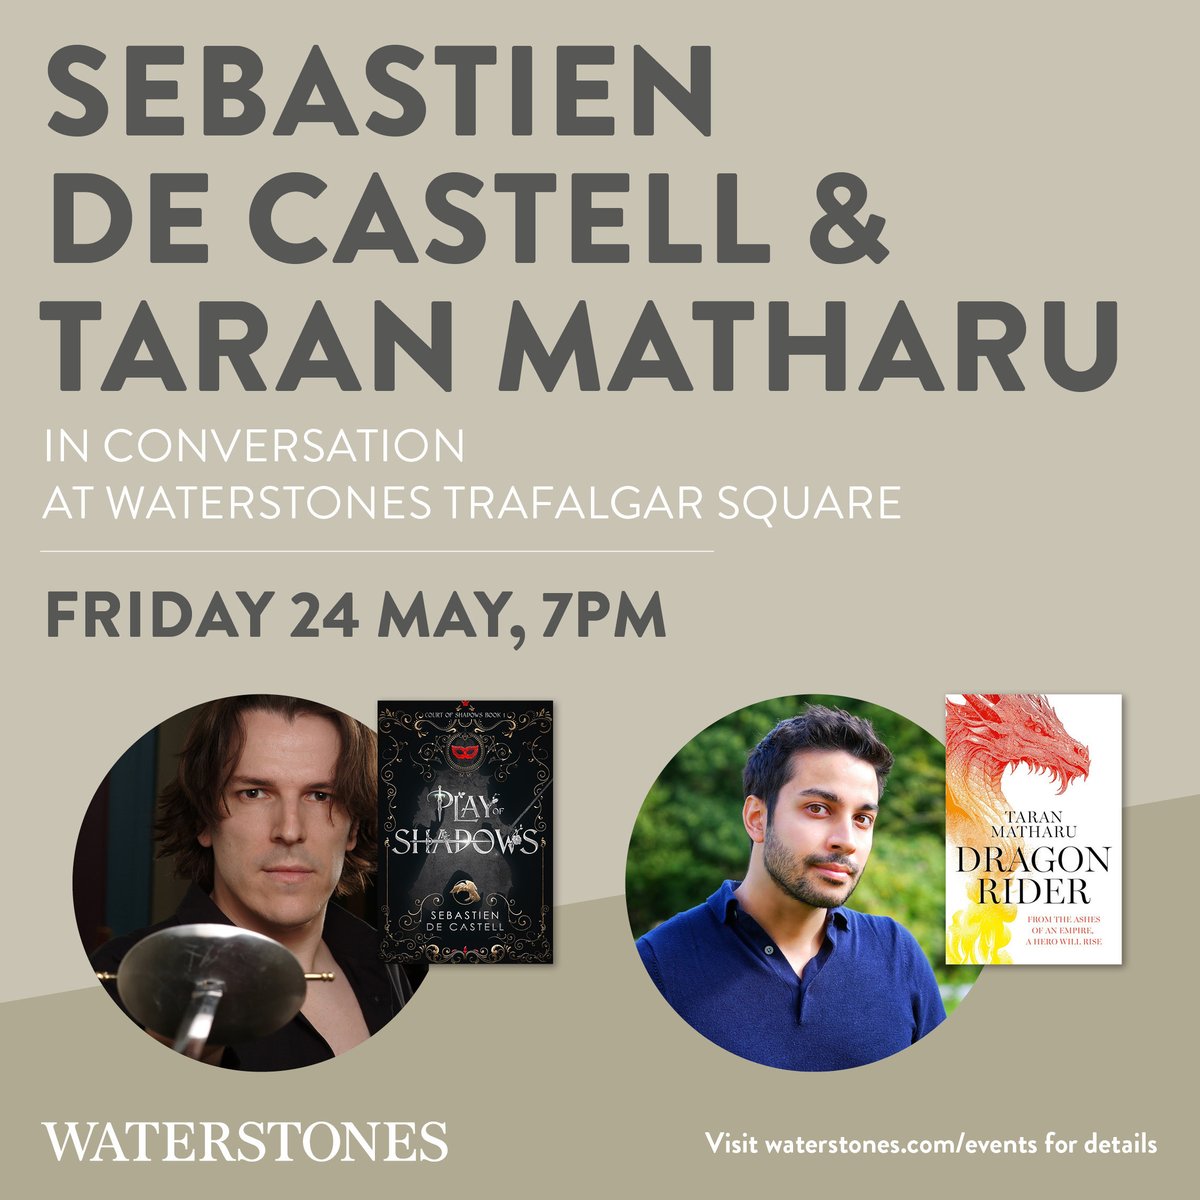 Hey London Friends! I'll be at Waterstones Trafalgar Square on Friday, May 24th with the fabulous Taran Matharu where we’ll talk fantasy, sign books, meet readers and possibly pit swords against dragons. Come one, come all. Click here for tickets: waterstones.com/.../london-tra…